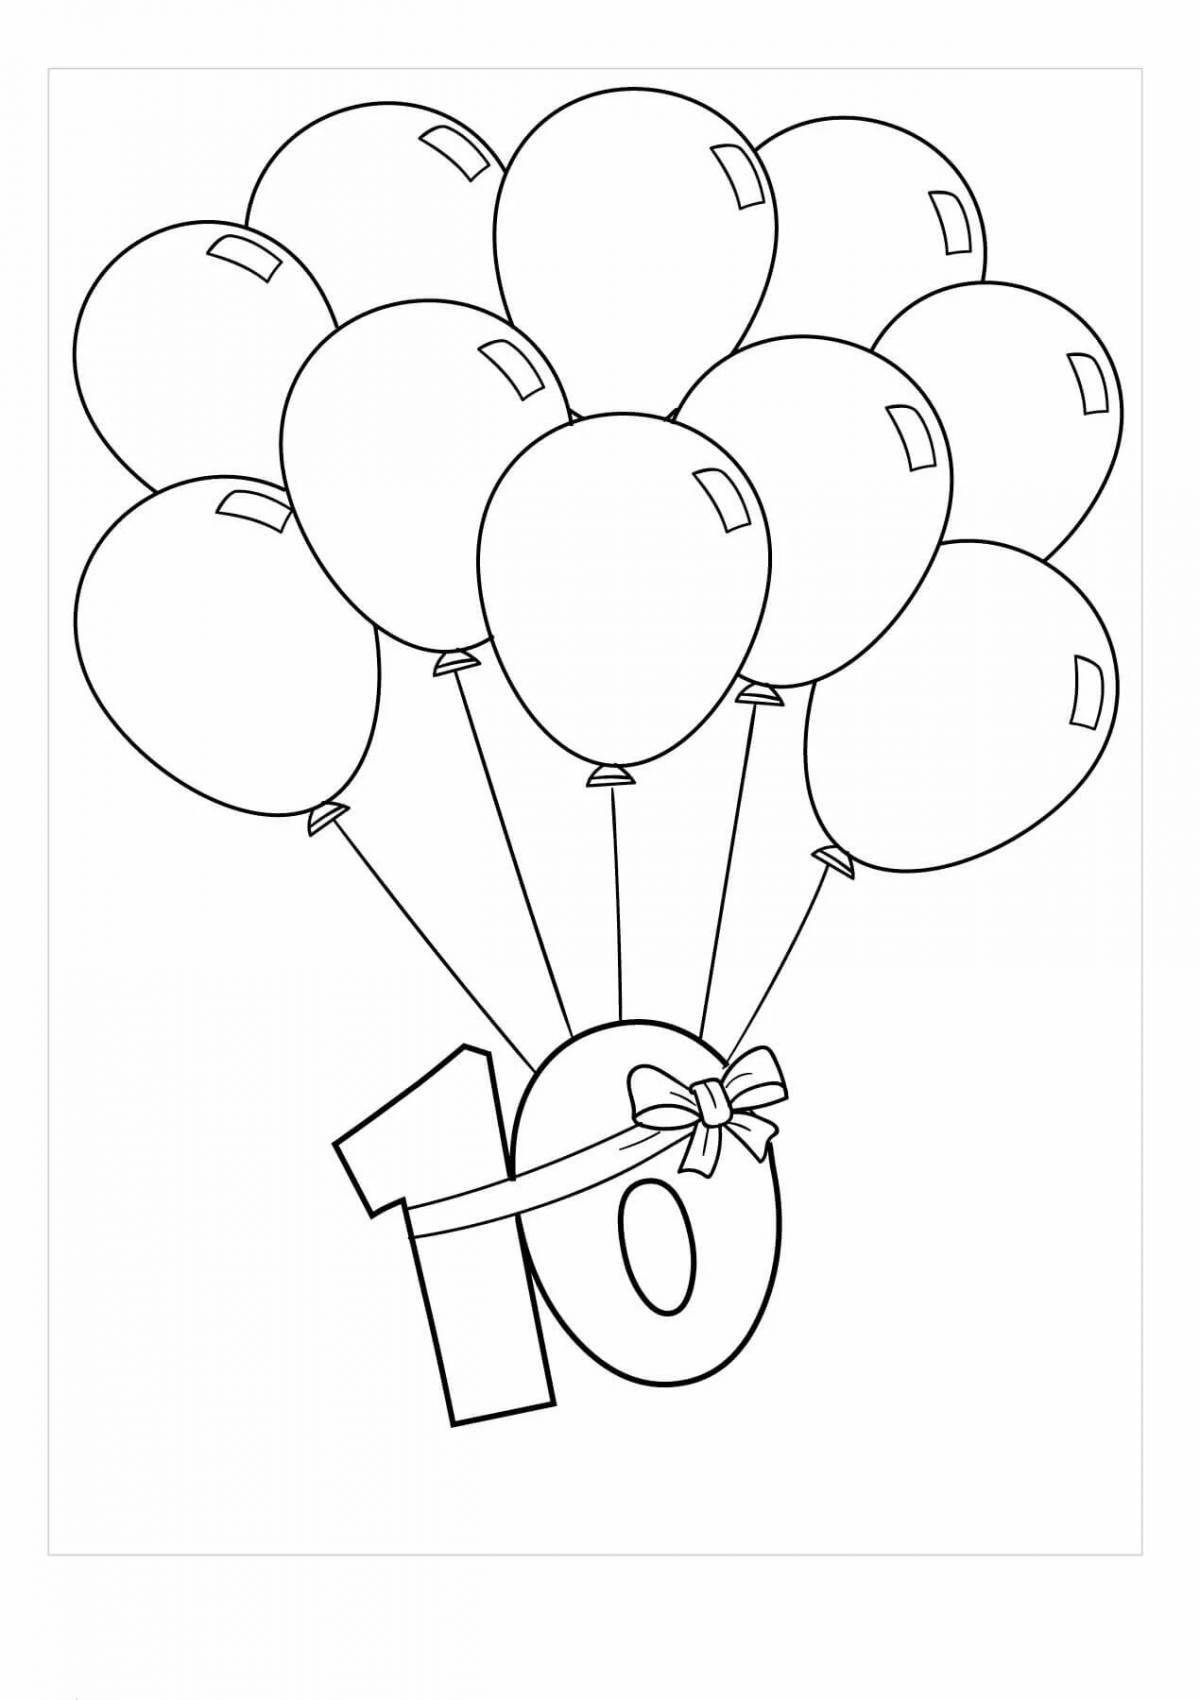 Sparkling balloons for children 2-3 years old